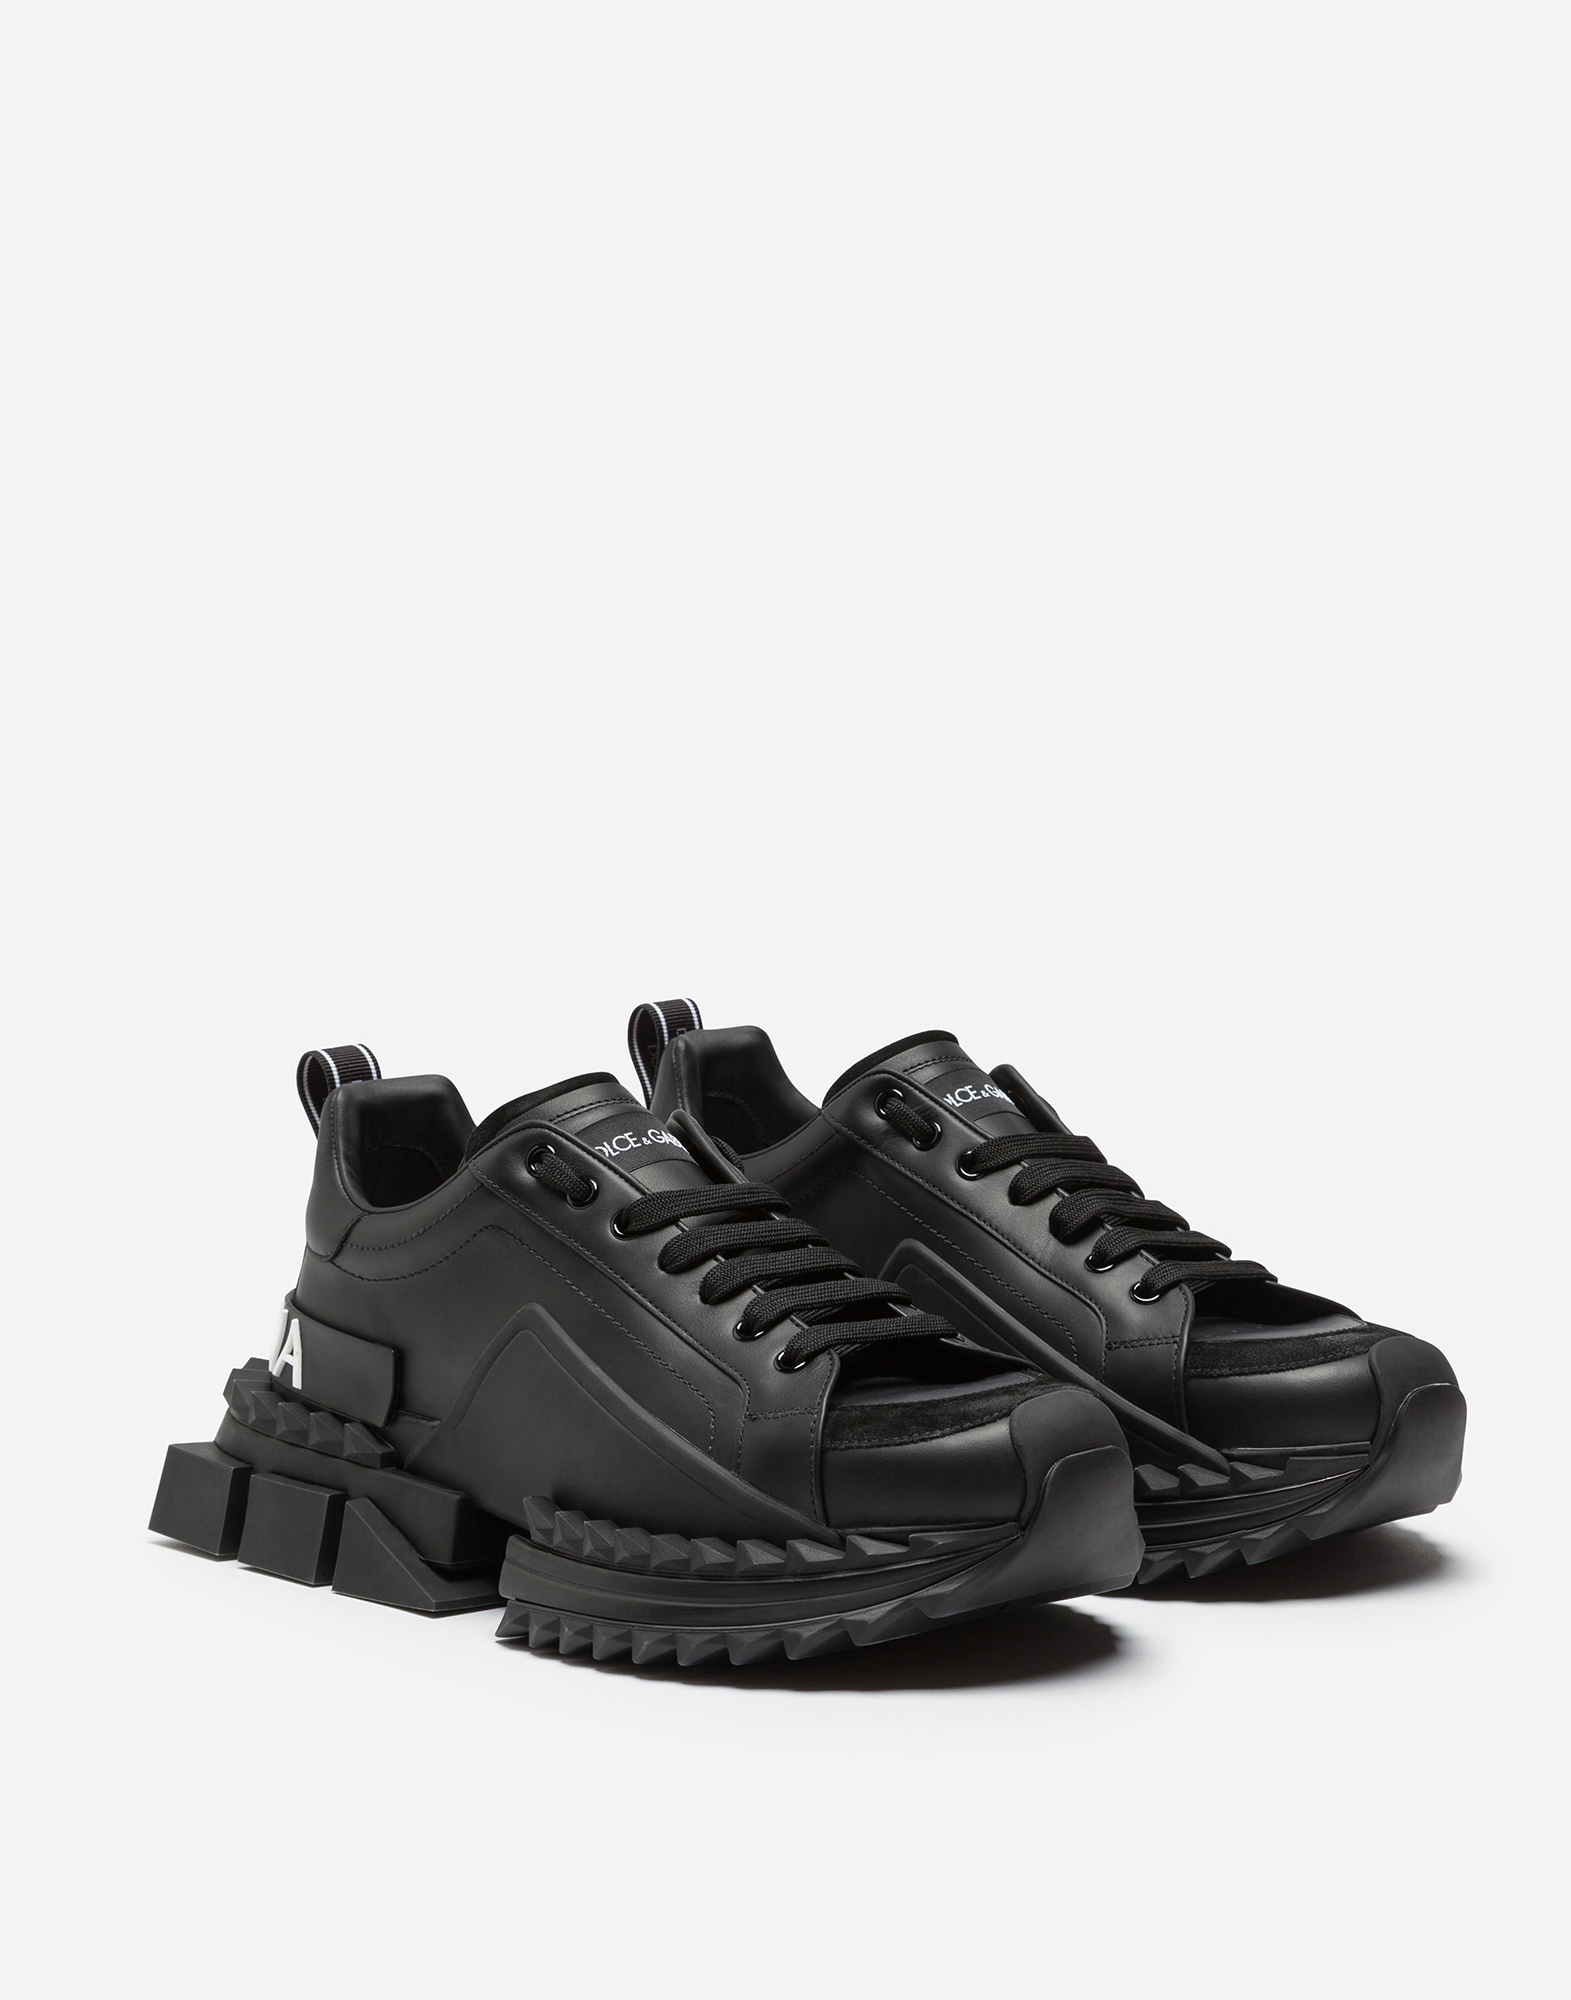 dolce and gabbana men's black sneakers